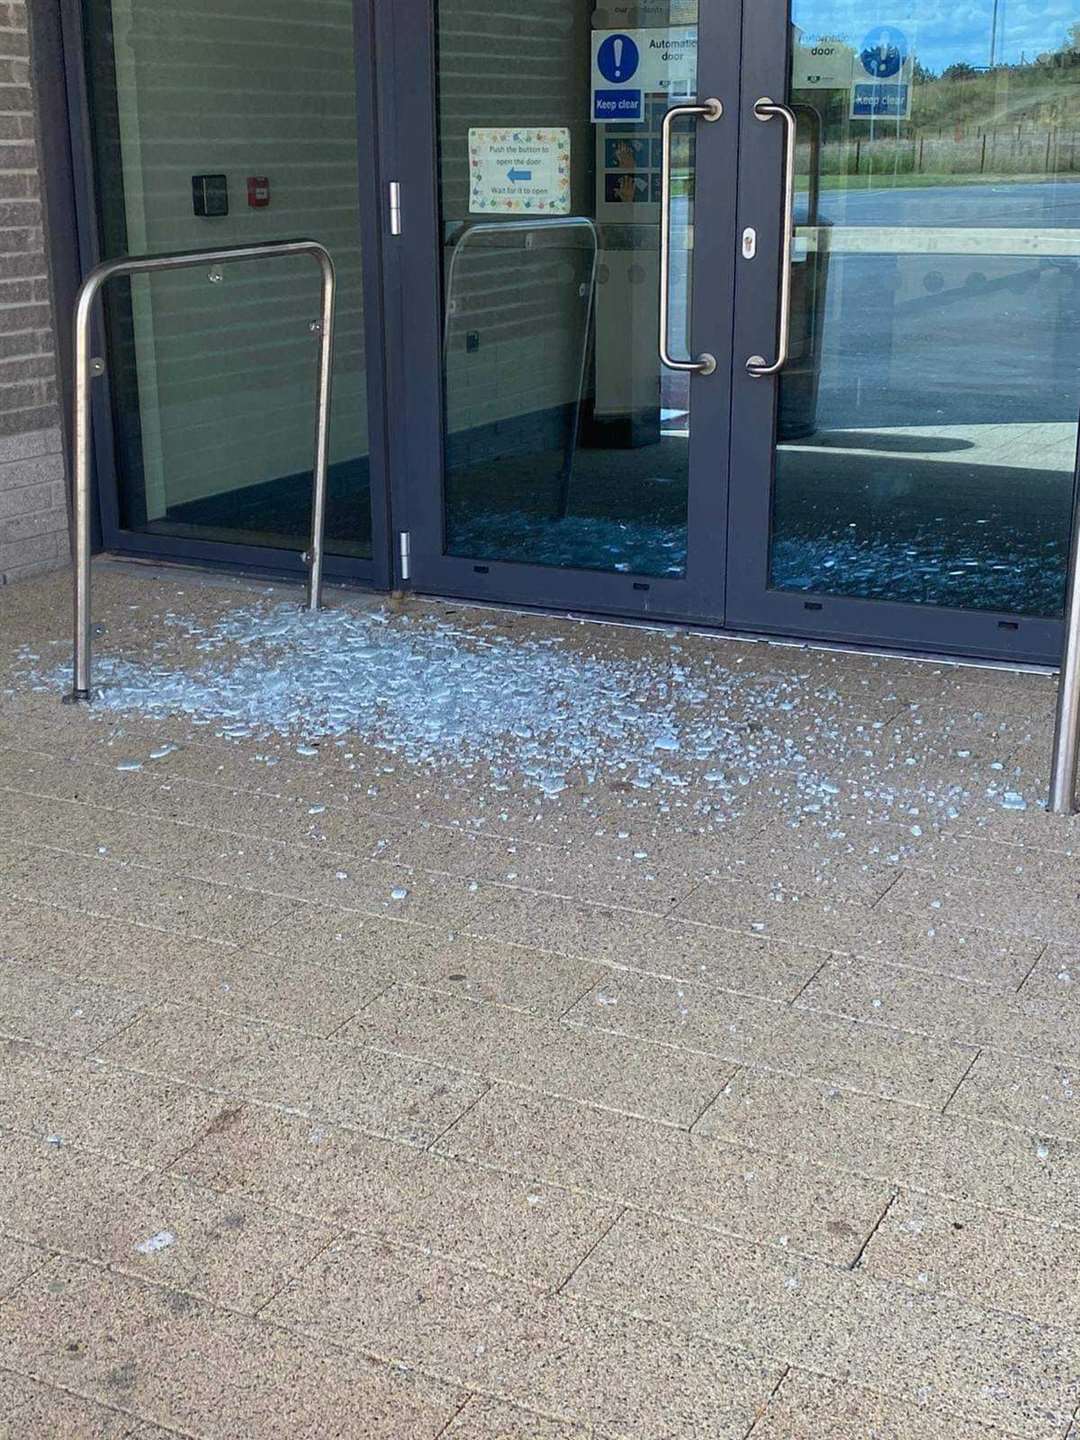 Glass strewn on the ground after vandals smashed a door at Lossiemouth's new high school.